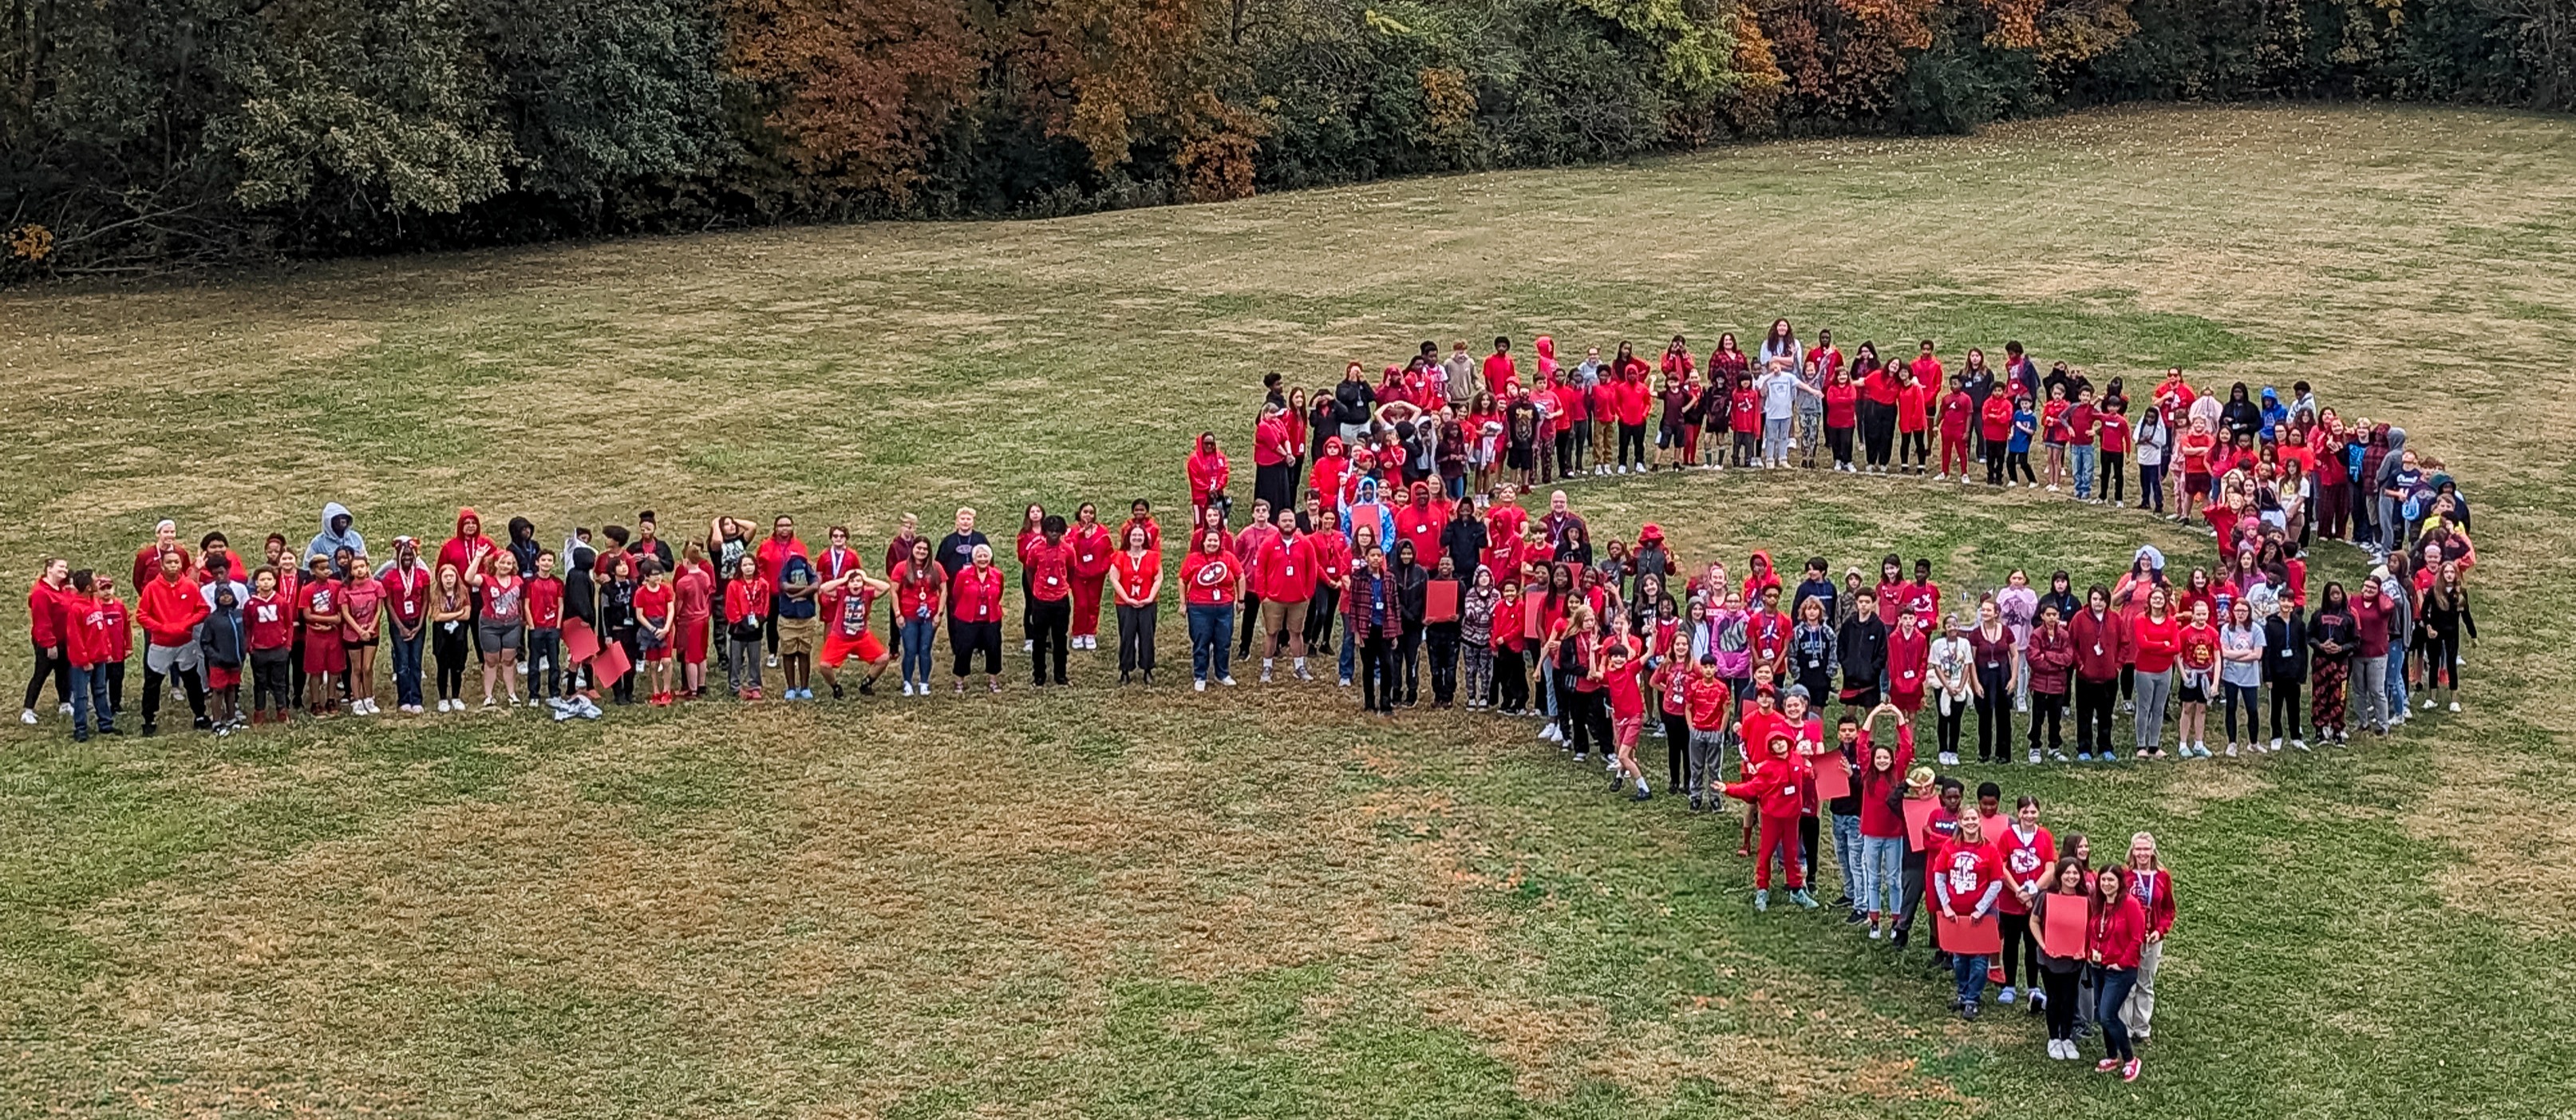 We rallied in red to show our Red Ribbon Week commitment to being drug free!